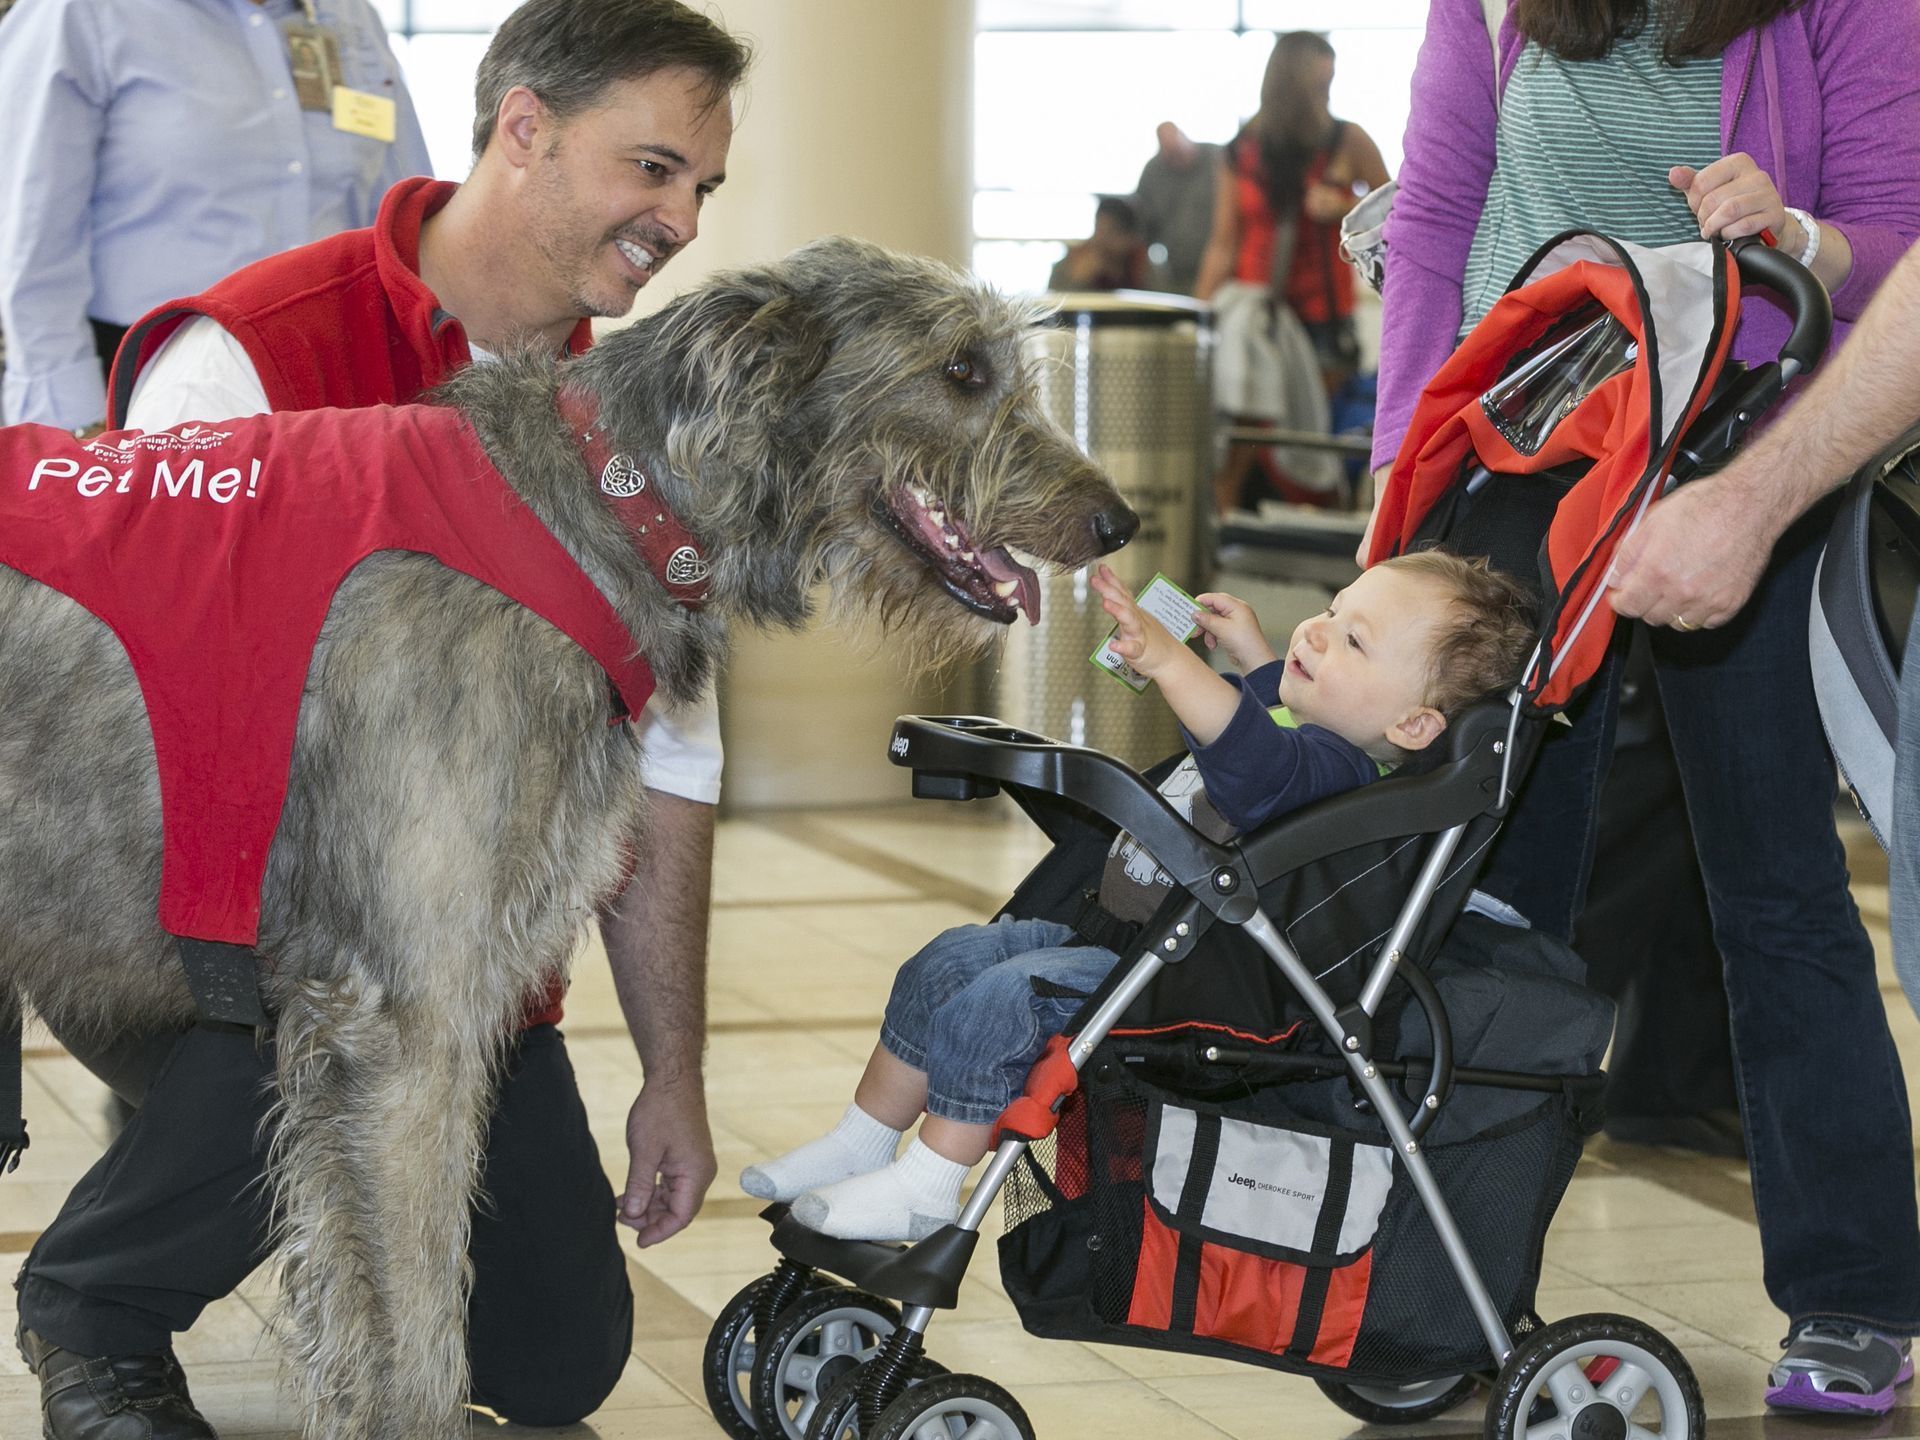 Even the youngest passengers are happy to meet the therapy dogs at the airport. (Finn, the Irish Wolfhound)